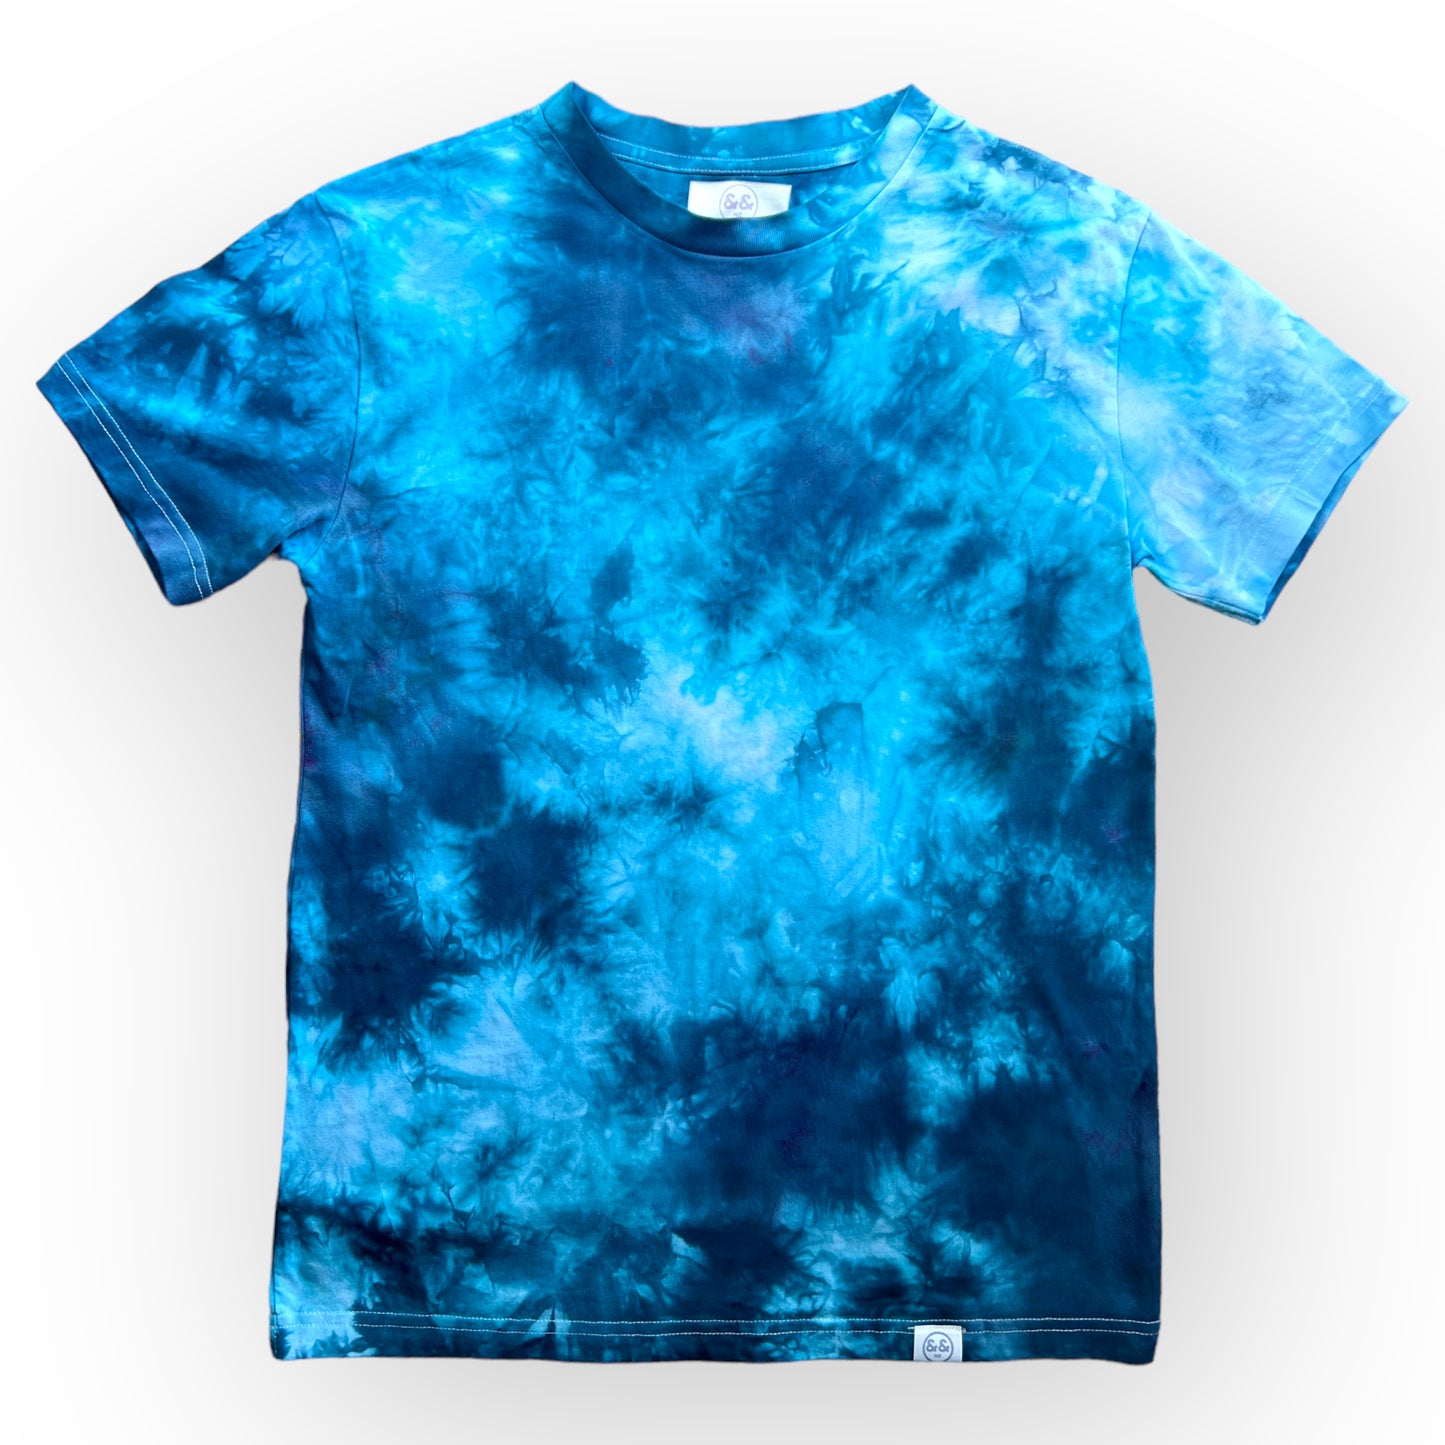 And And Tie Dye Clothing - Tie Dye NZ Small Tie Dye T-Shirt